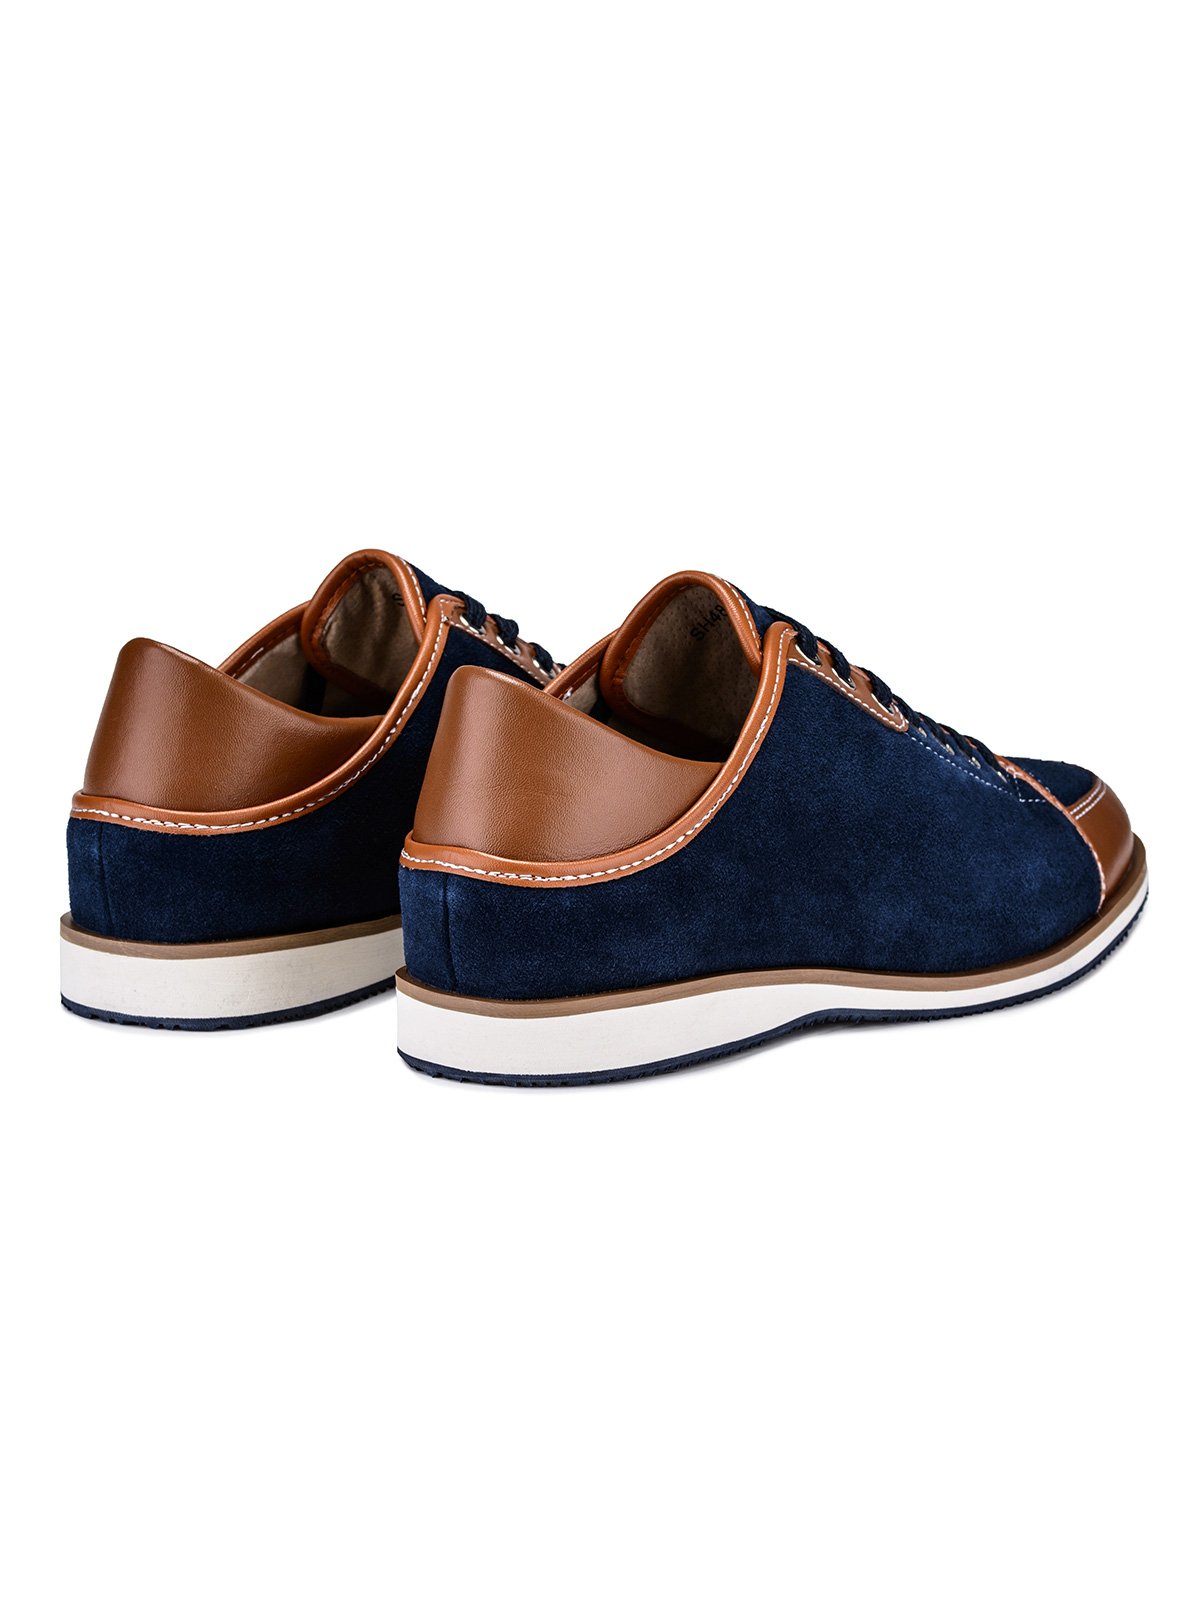 Men's casual lace-ups T244 - navy | MODONE wholesale - Clothing For Men